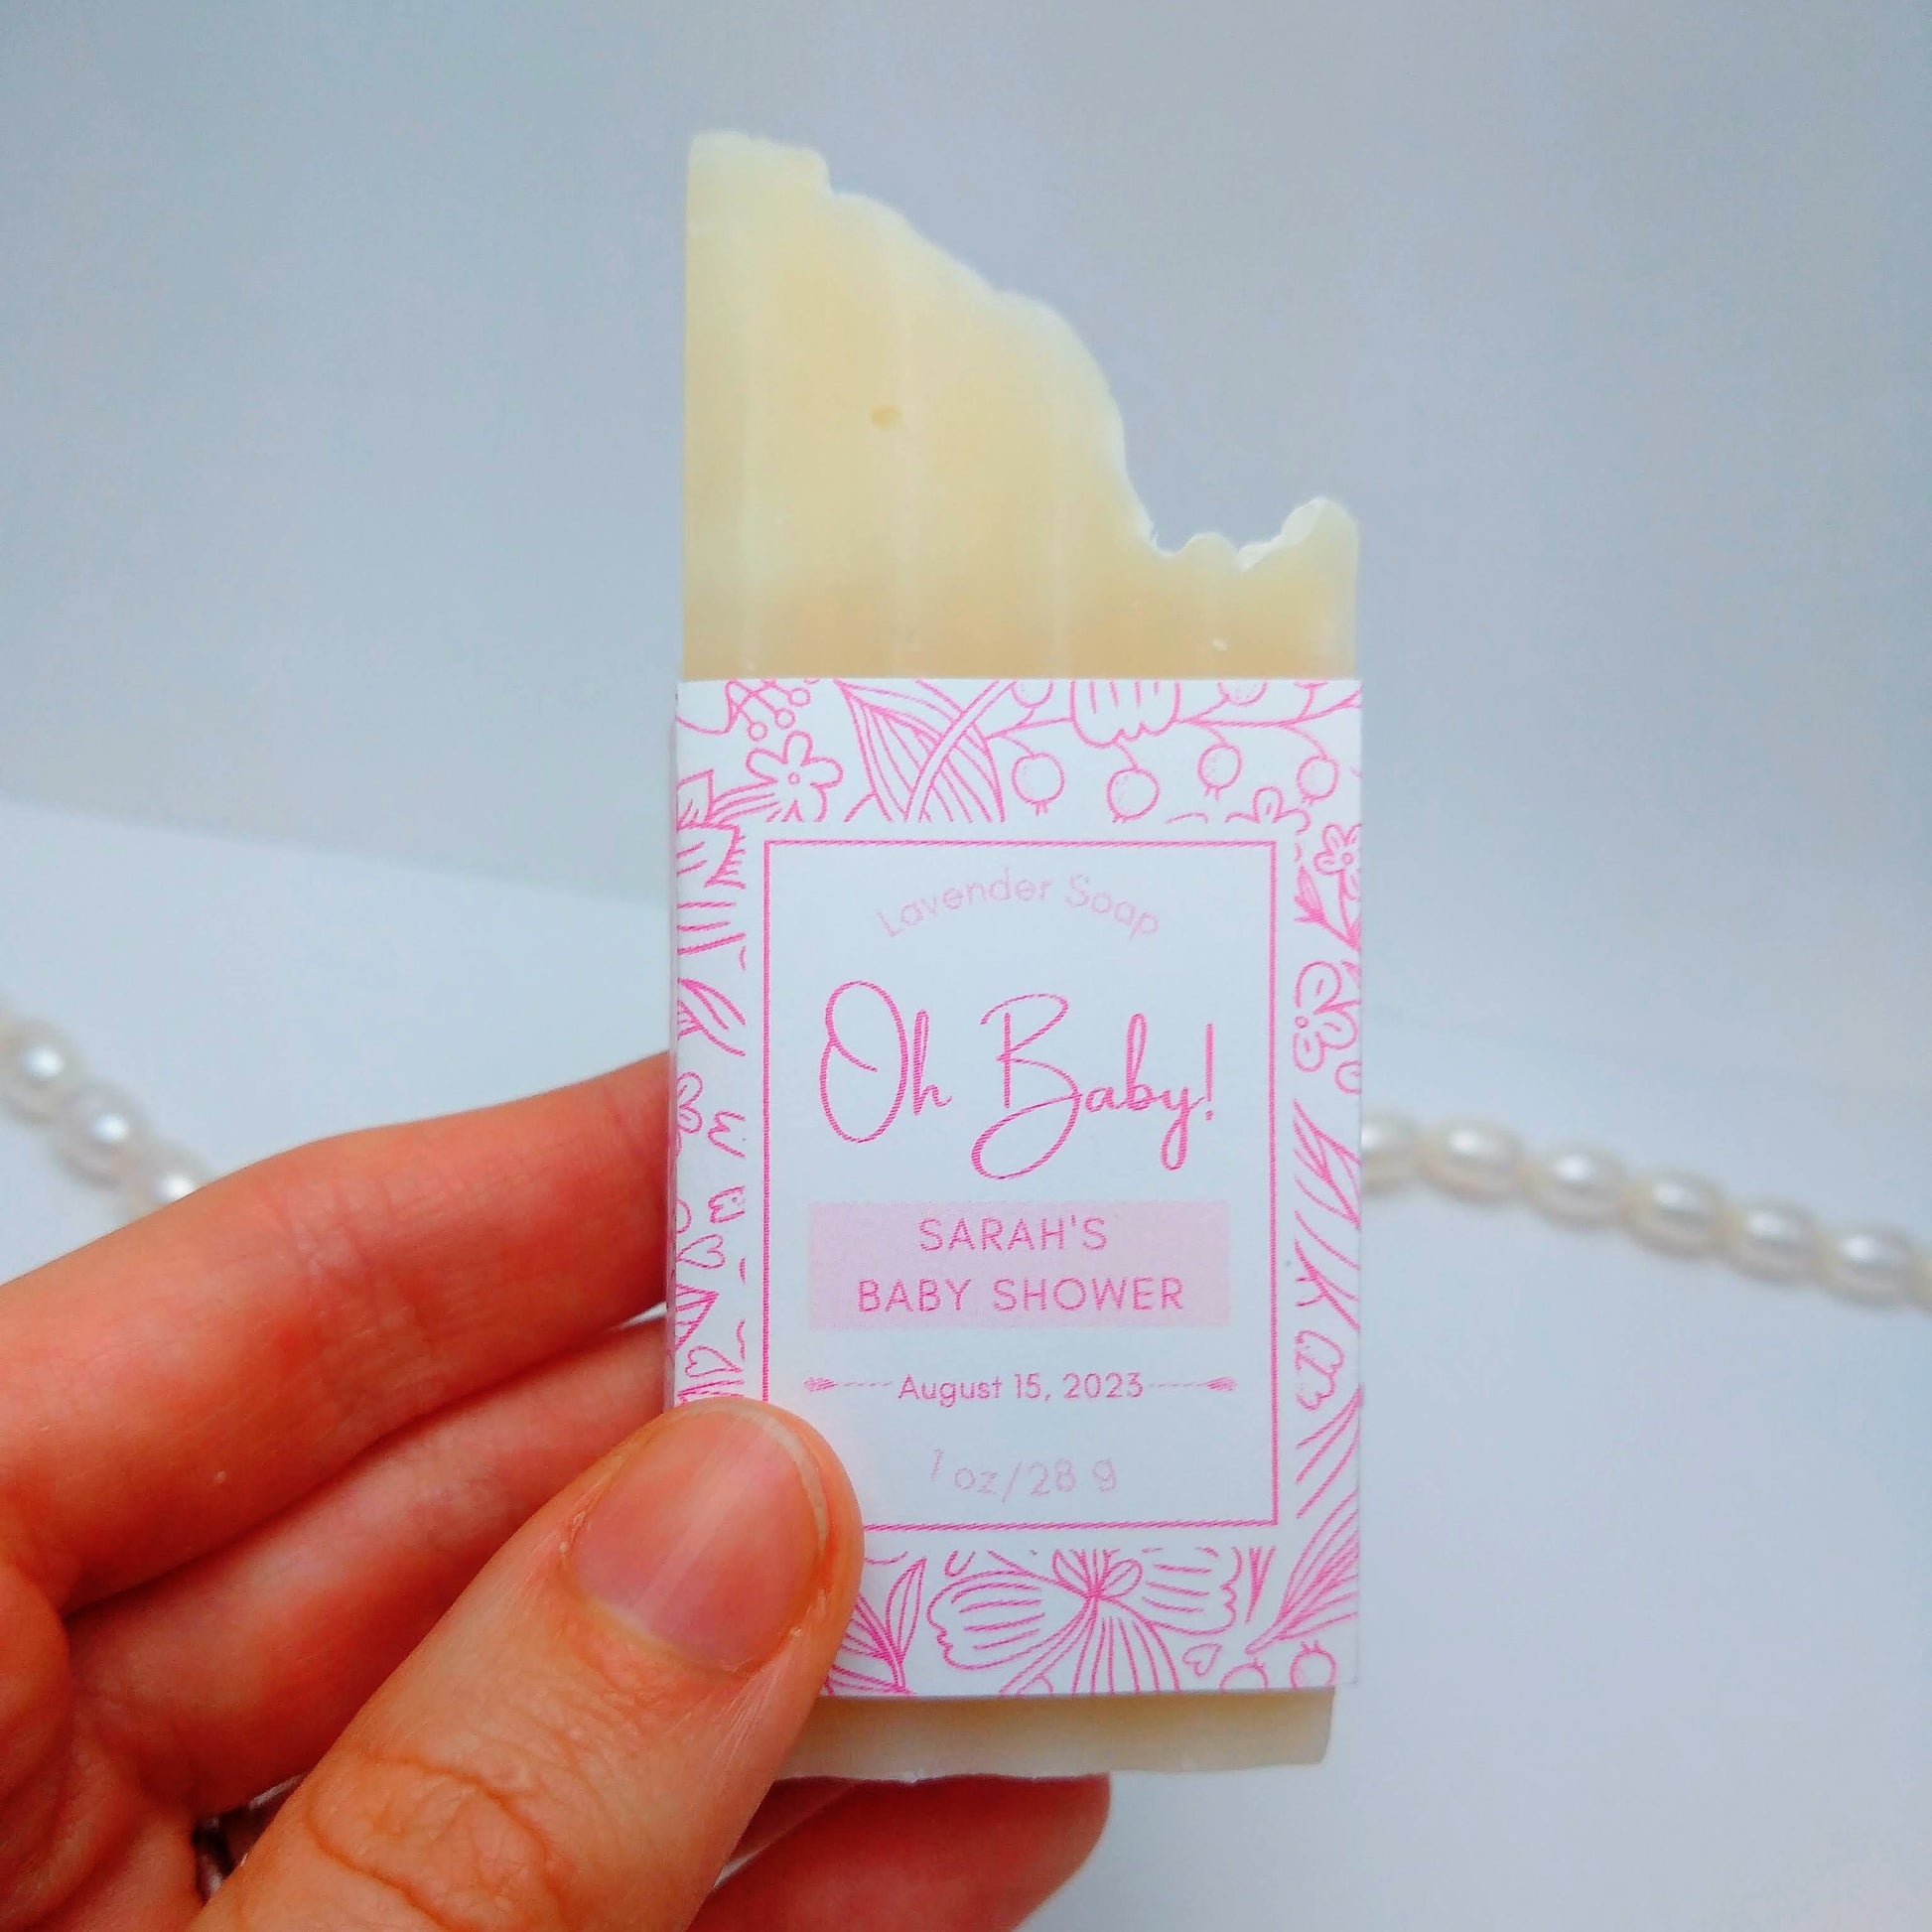 A mini bar of cream-colored soap is held in a hand with a string of pearls in the background. The soap has a pink label printed with Oh Baby!, Sarah's Baby Shower, August 15, 2023. 